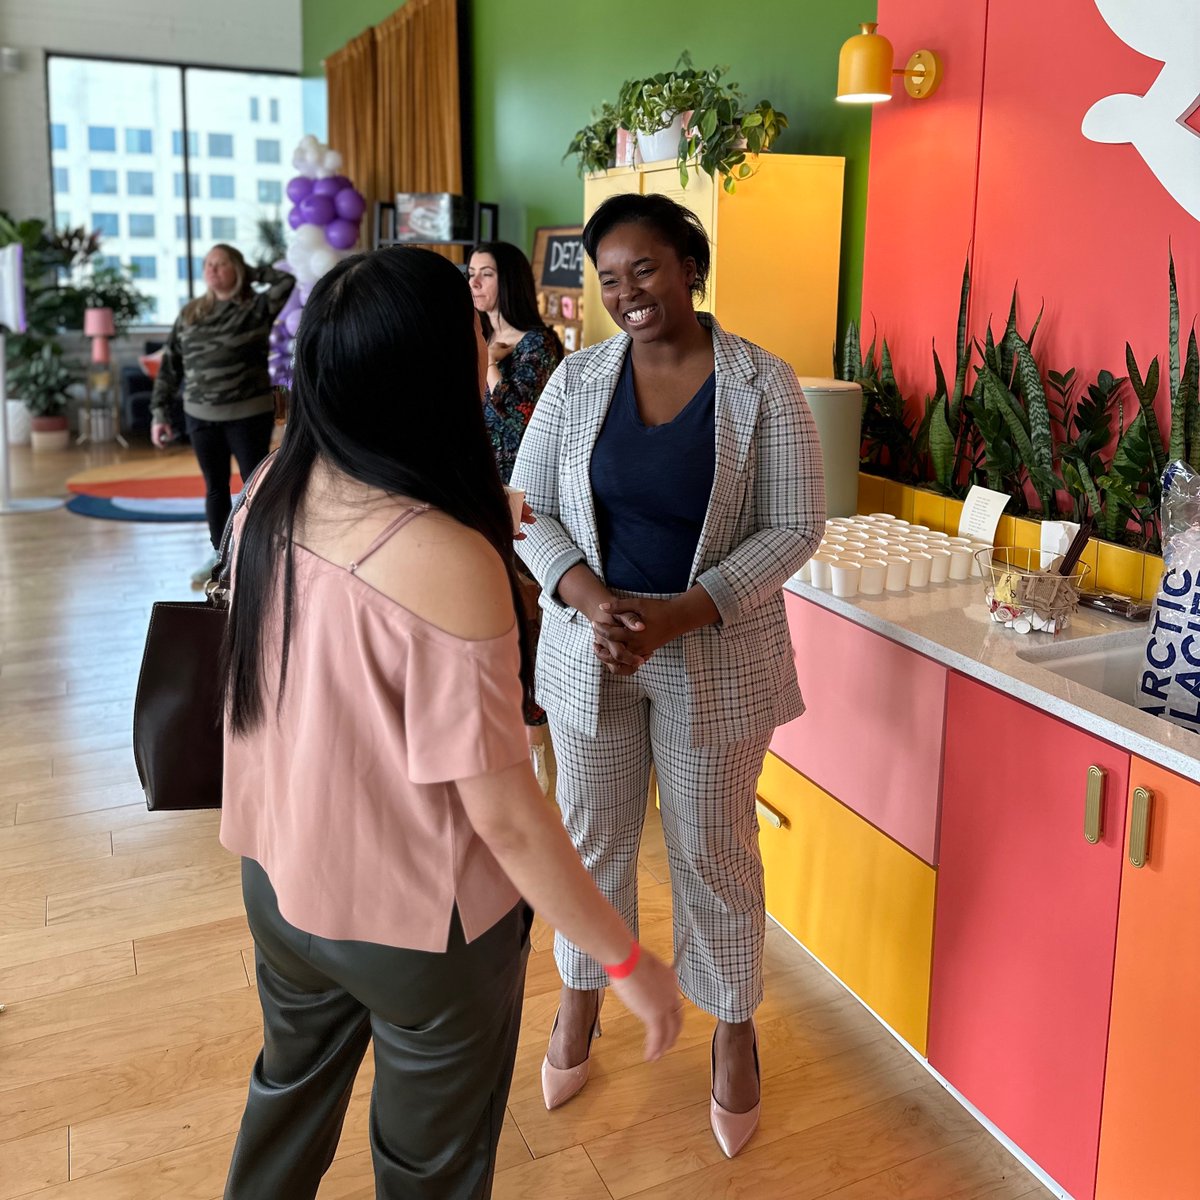 Our founder Tashiara Wilson chatted with guests at Yelp's Women Make Omaha event on 3/26 at Luli Creative House! People got to taste the coffee and hear more from her about Kochava's mission and goals!
Be sure to RSVP to our grand opening on June 3, 2023!
hubs.ly/Q01Kz_d50